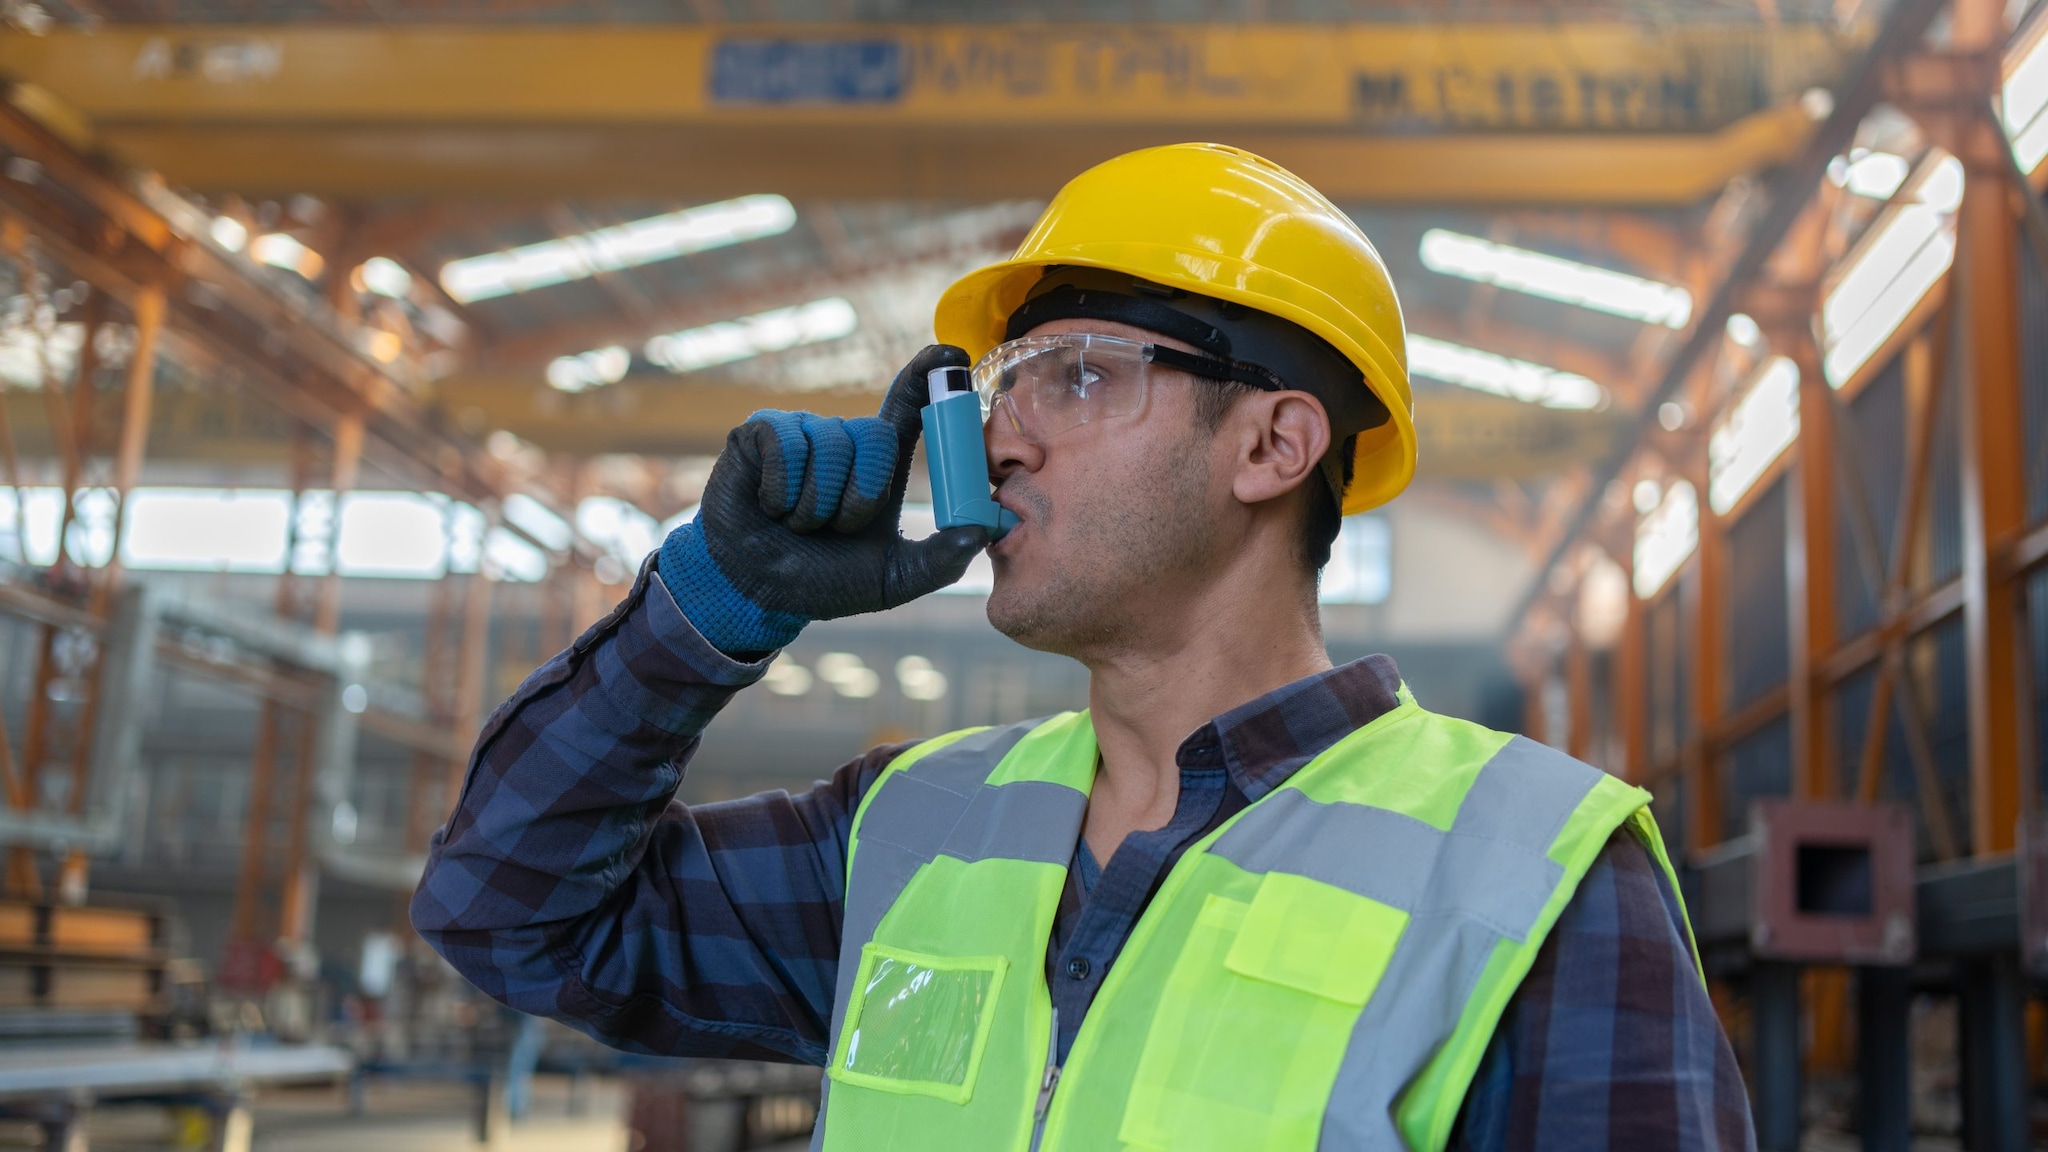 Man at work, wearing a hard hat and using an inhaler. Image by Getty Images.